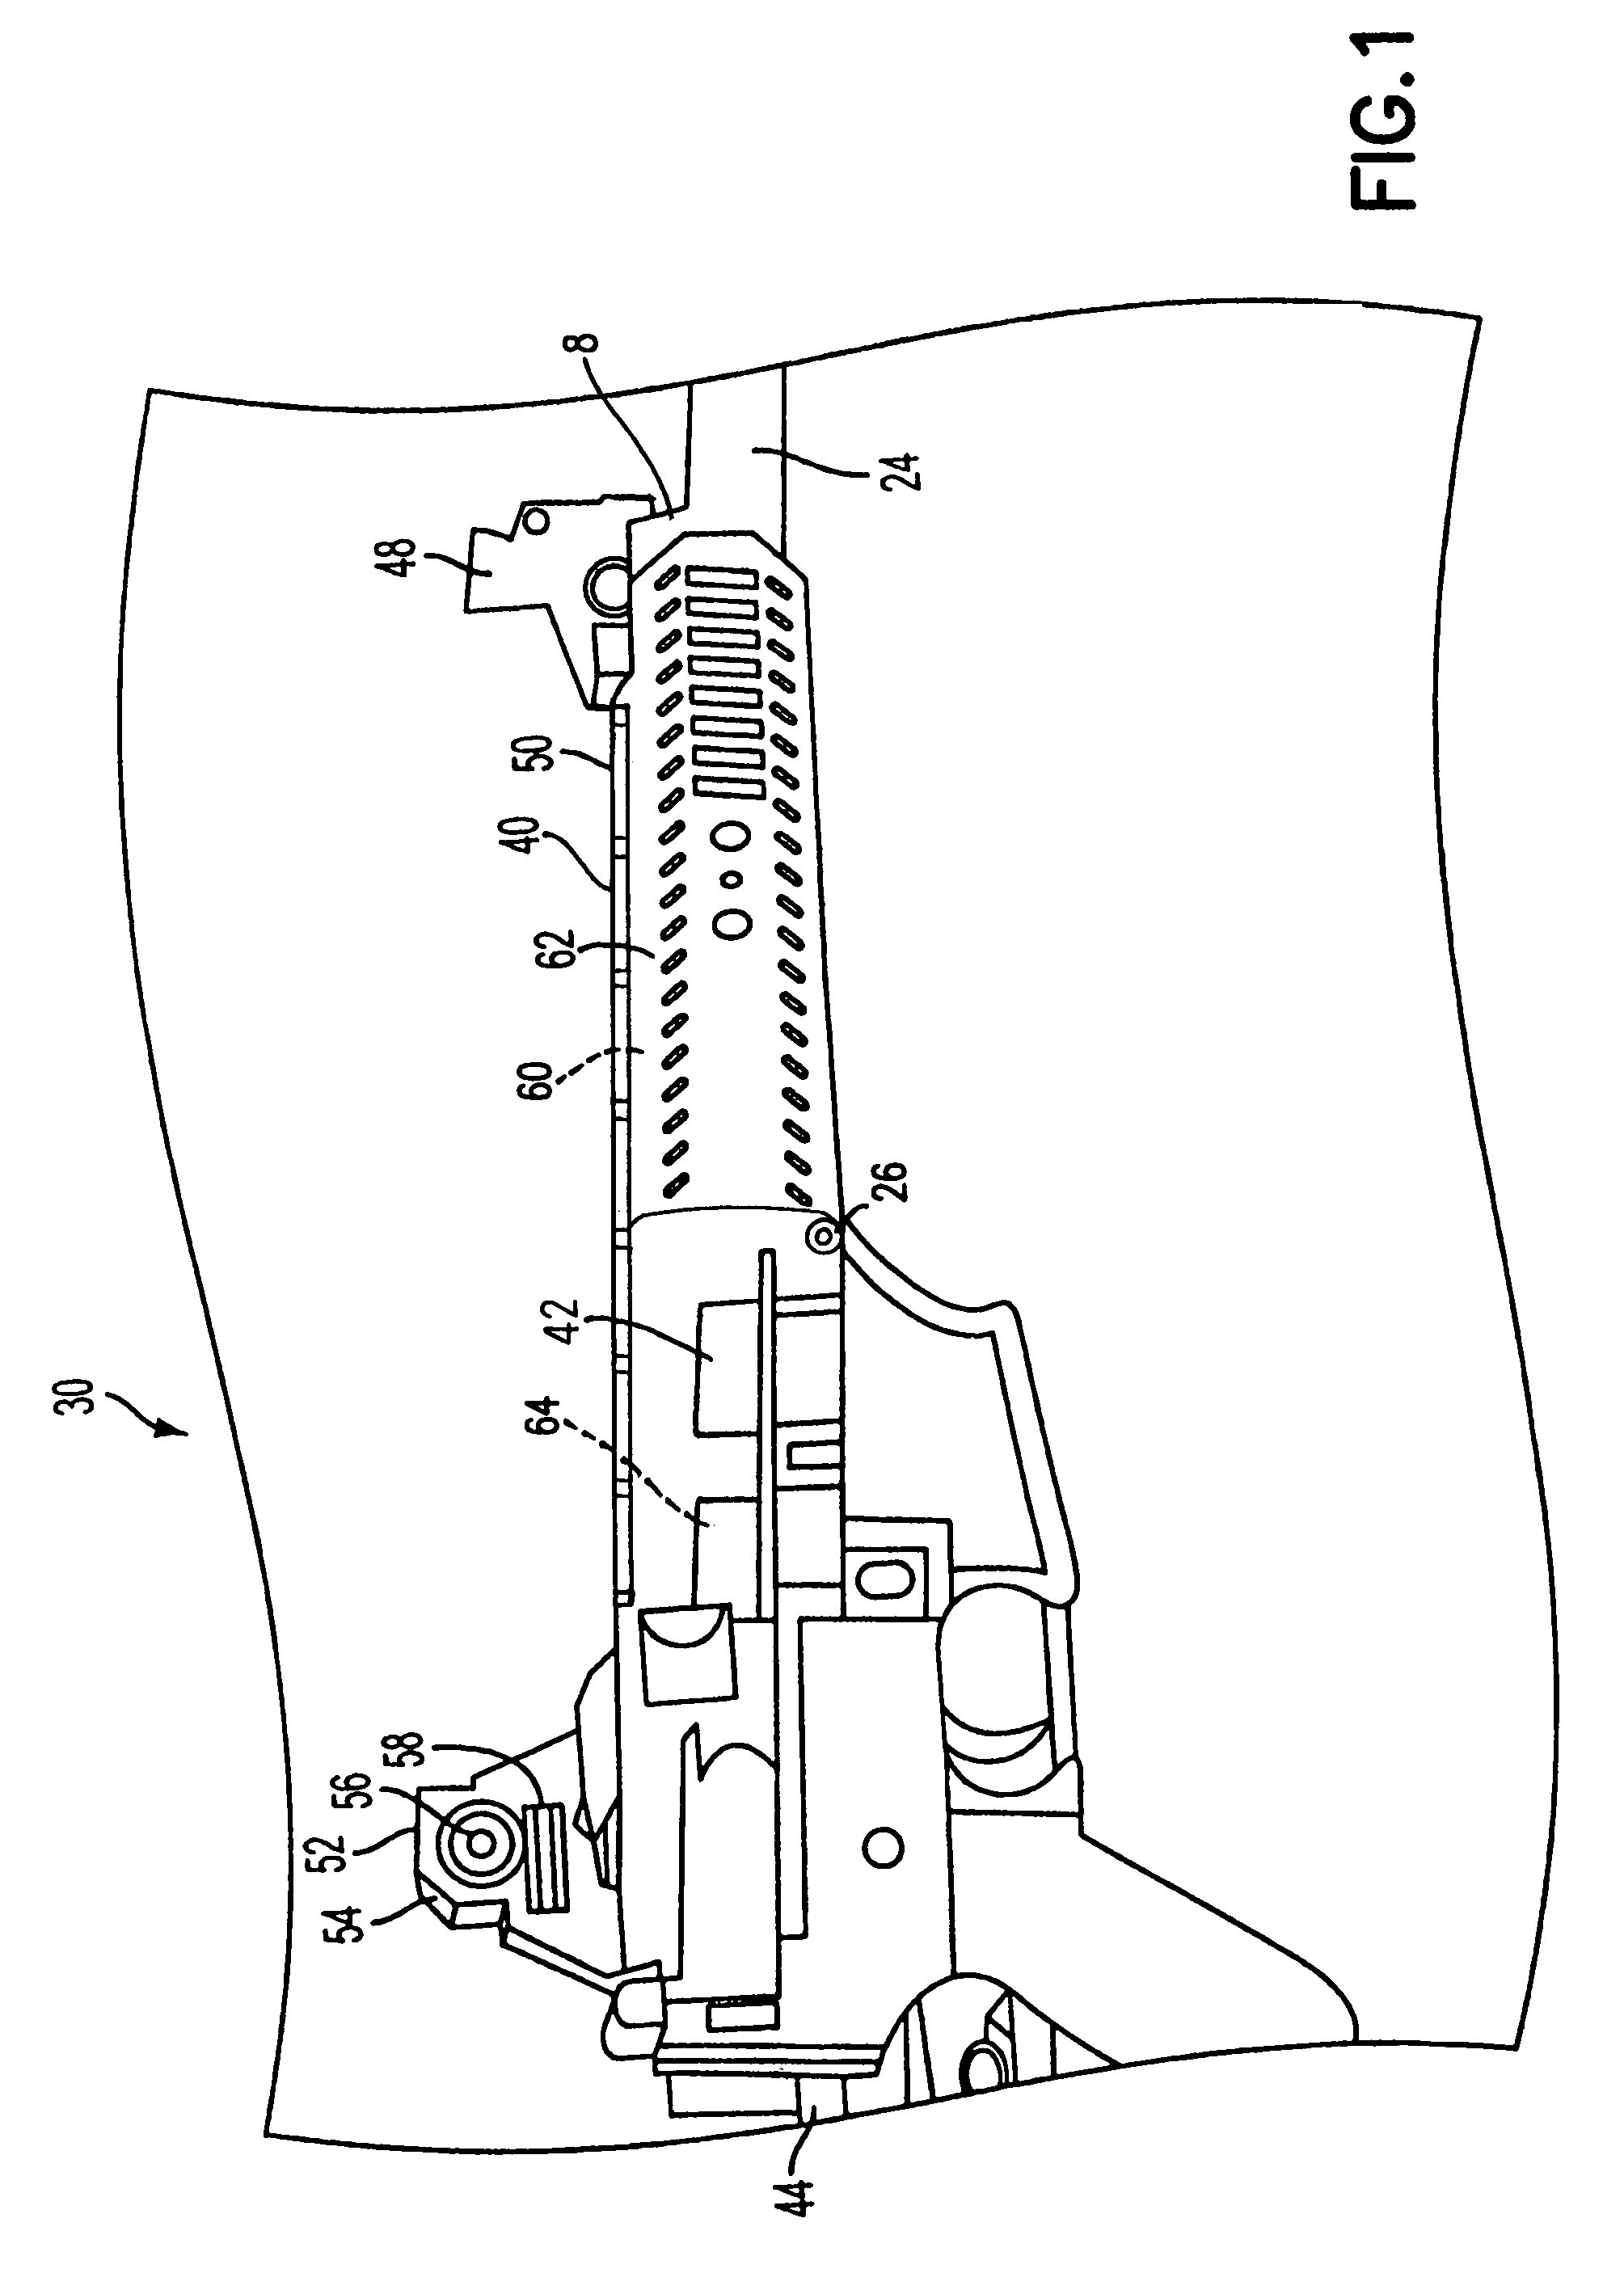 Firearm having an indirect gas operating system